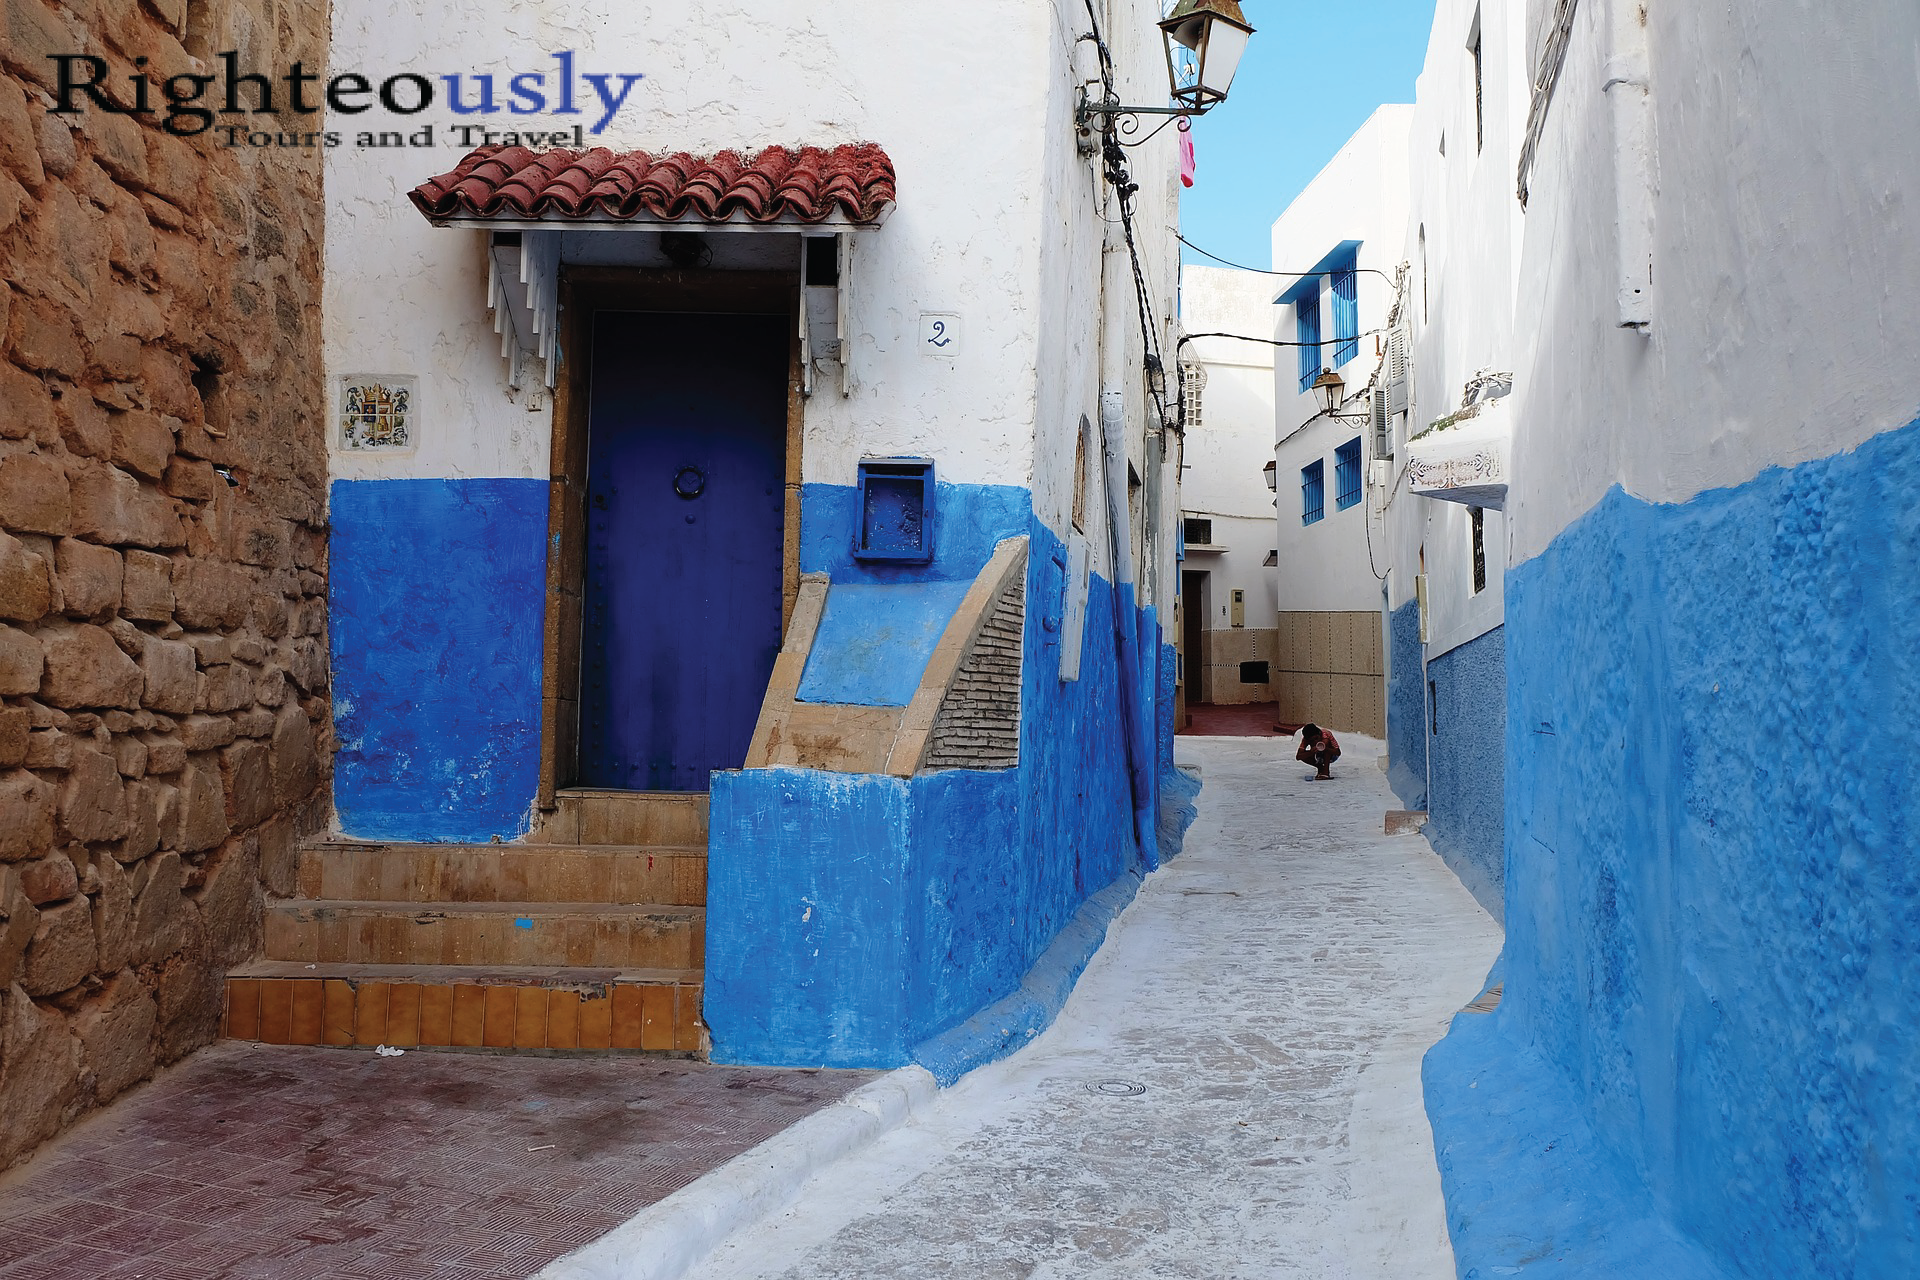 Chefchaouen, the Blue City powered by righteouslytours.com